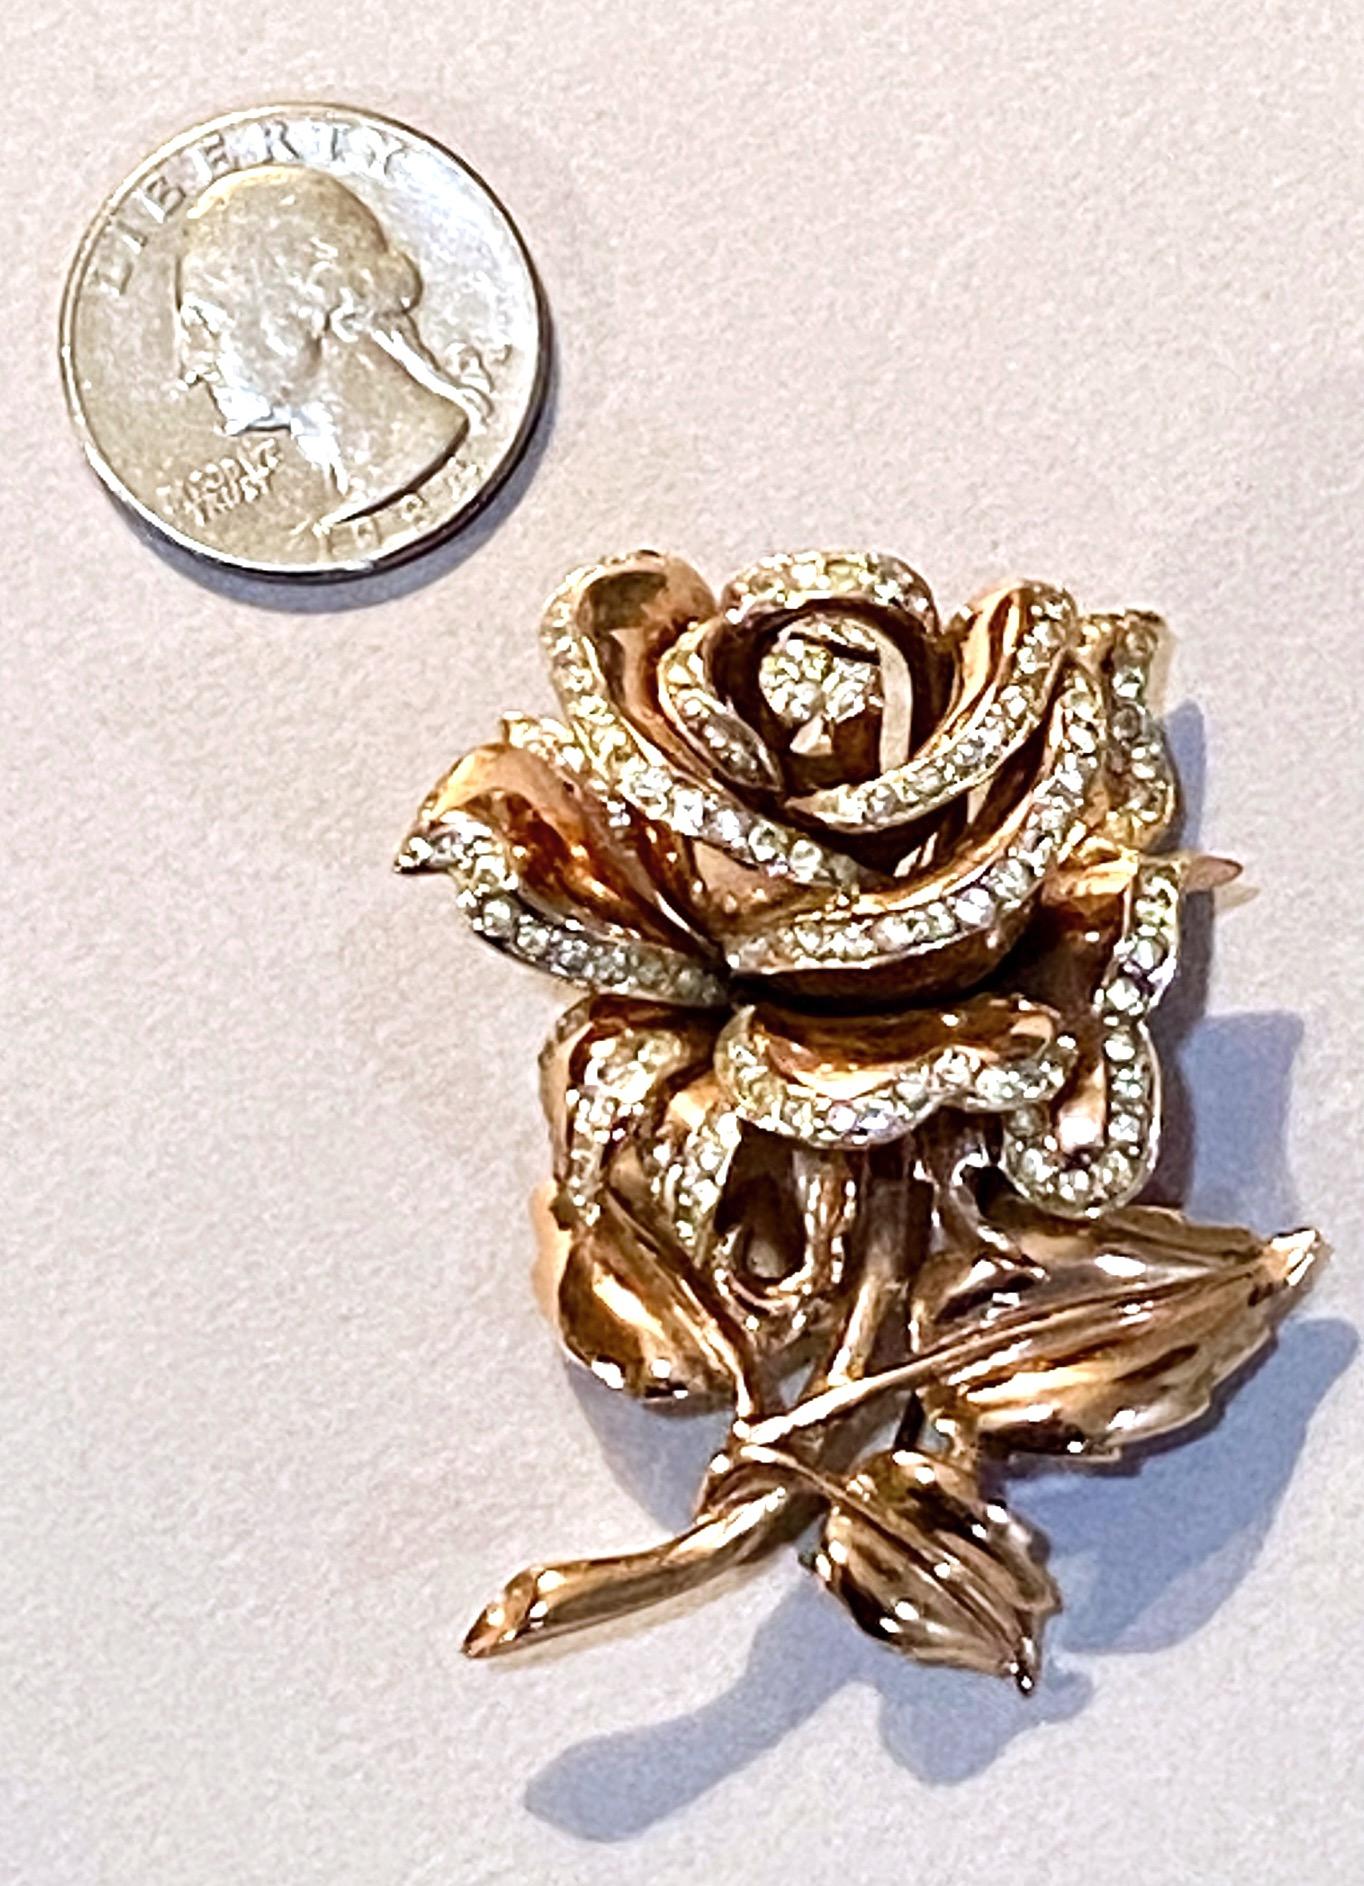 Coro Craft 1940 Rose Gold & Sterling Silver Rose brooch & Earrings, Adolph Katz 2